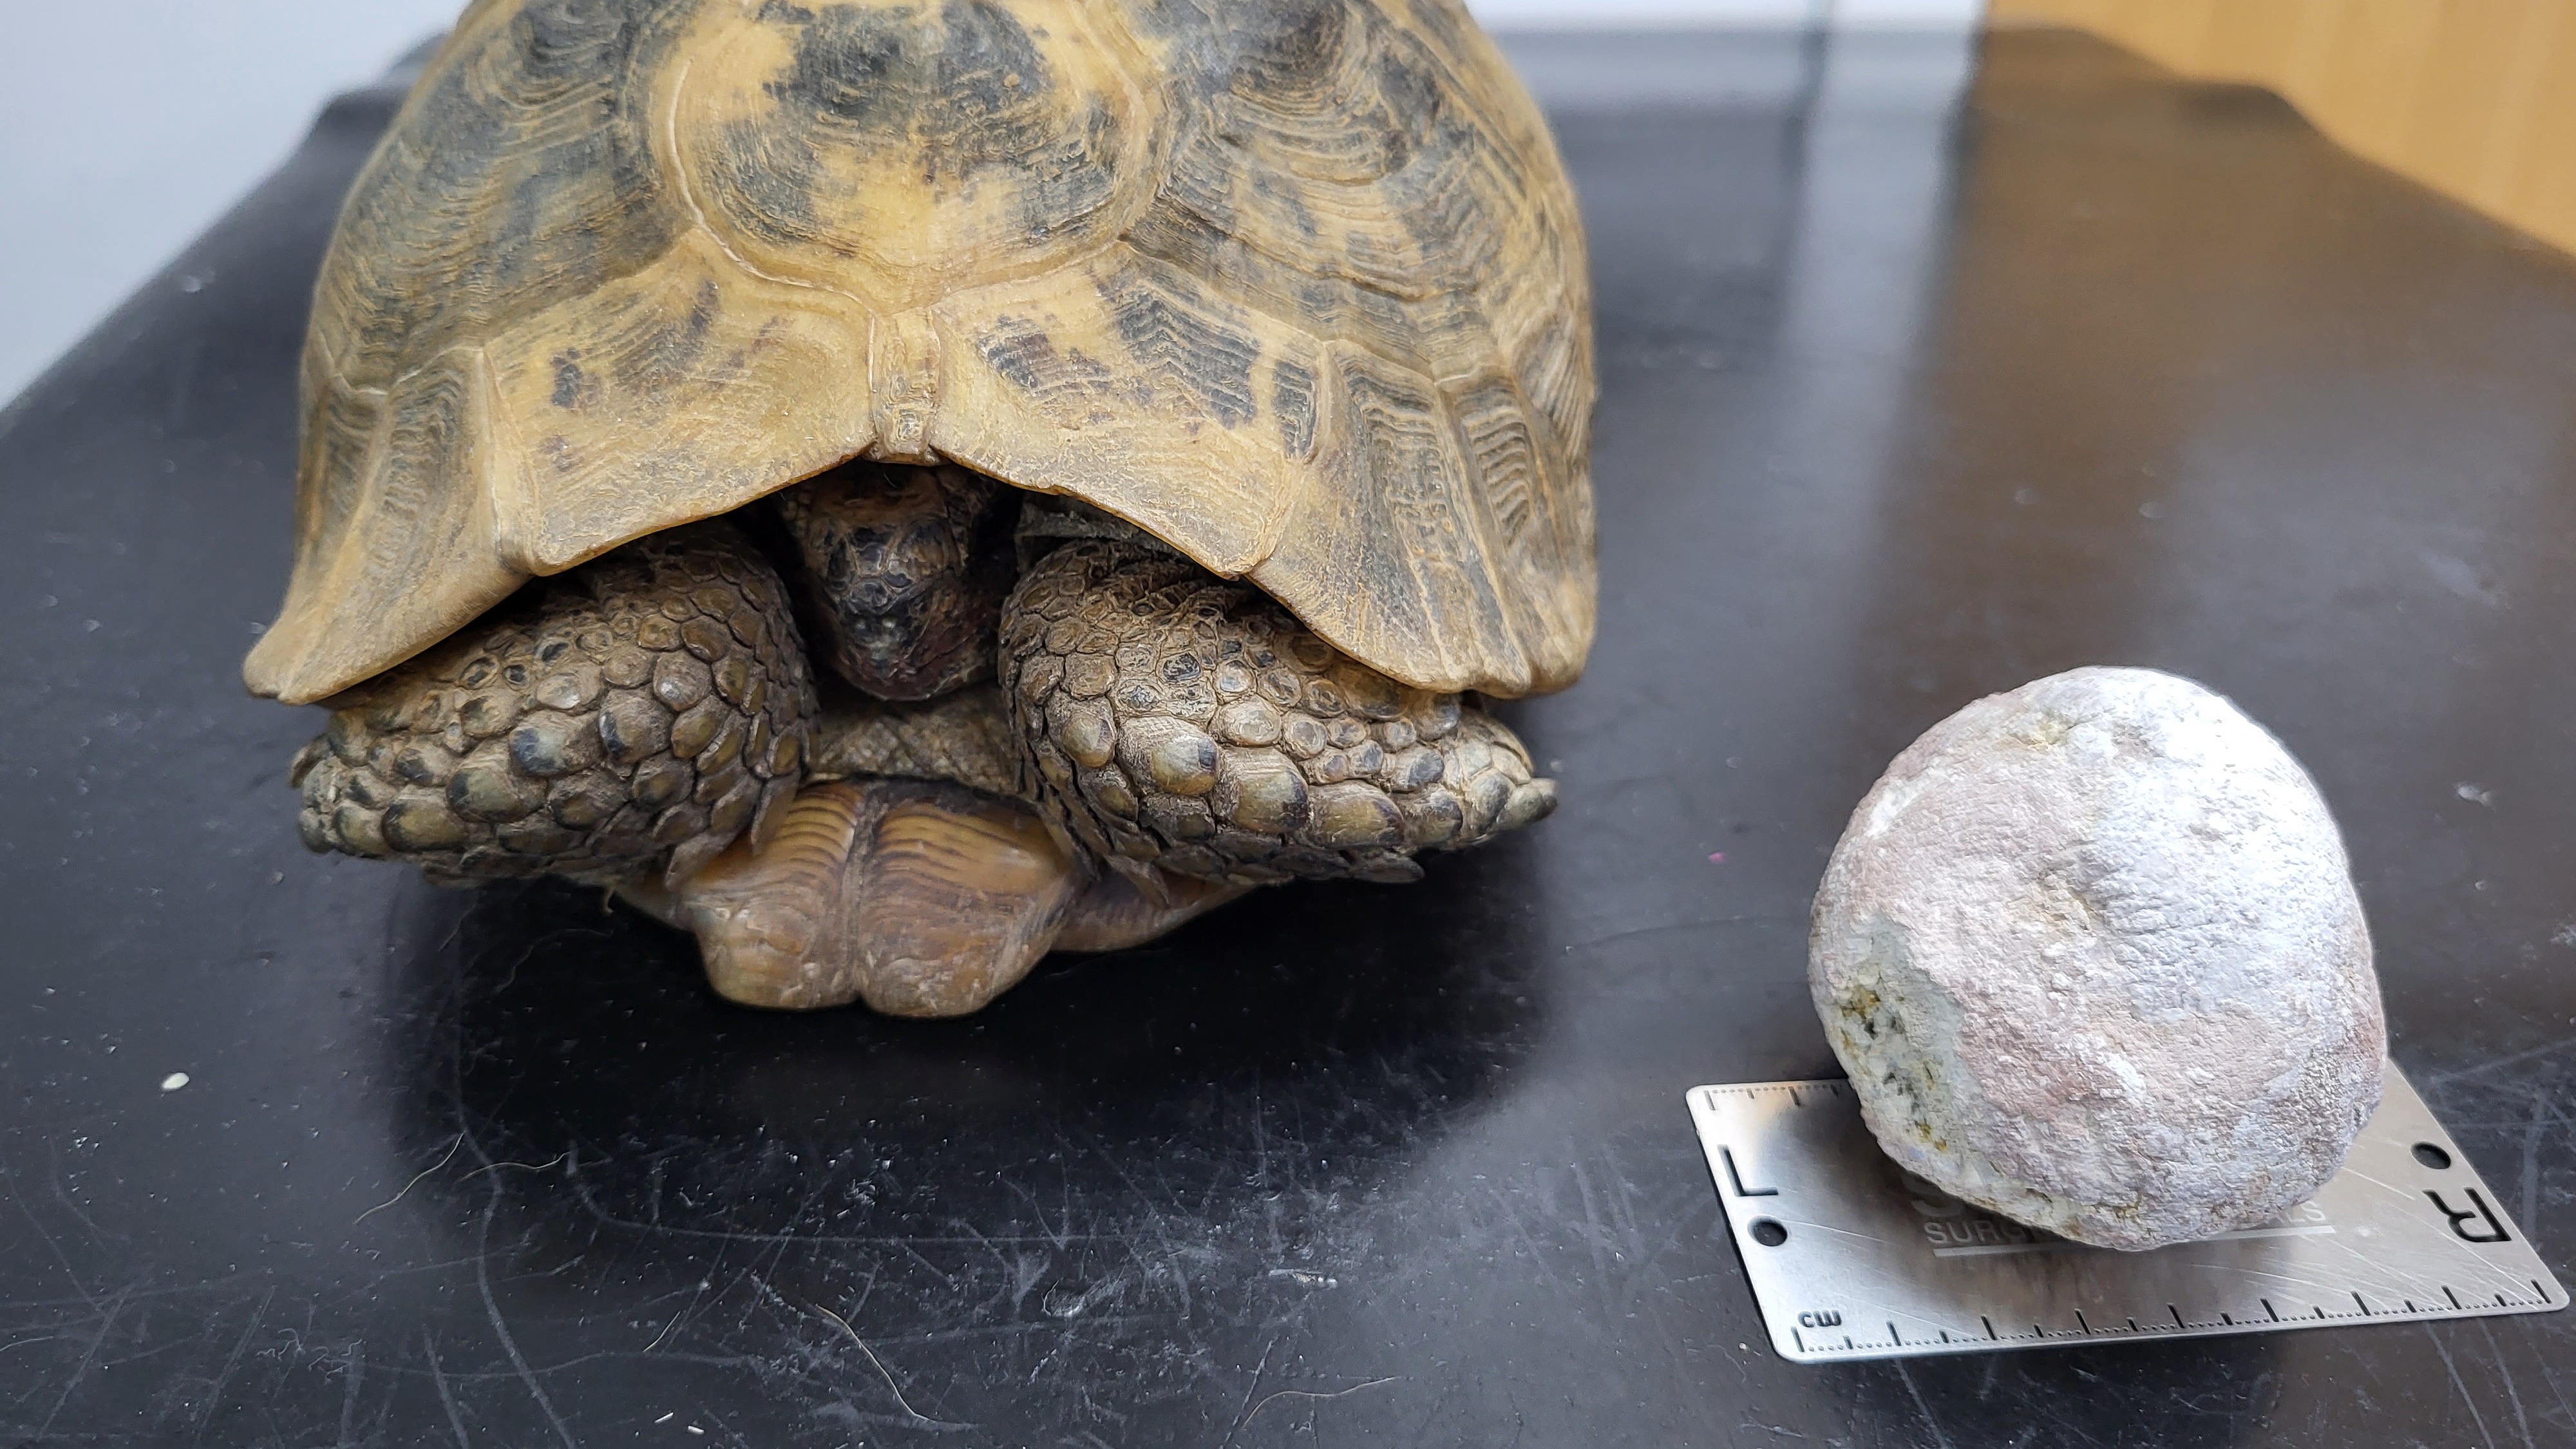 82-year-old tortoise needs two vets to remove bladder stone